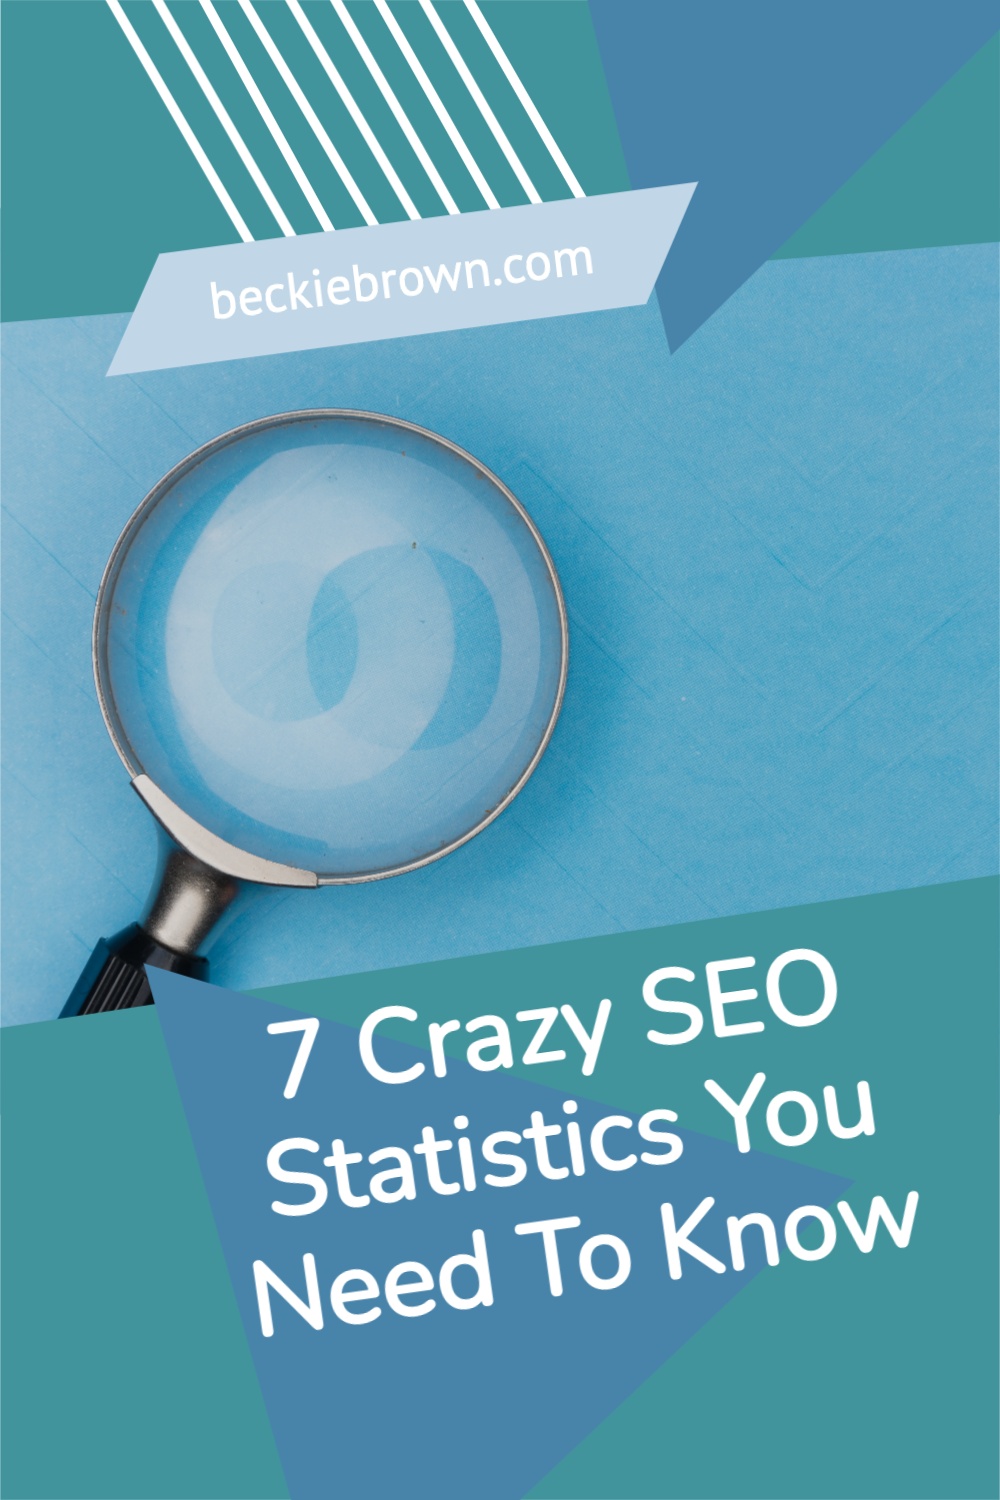 SEO - Need To Know